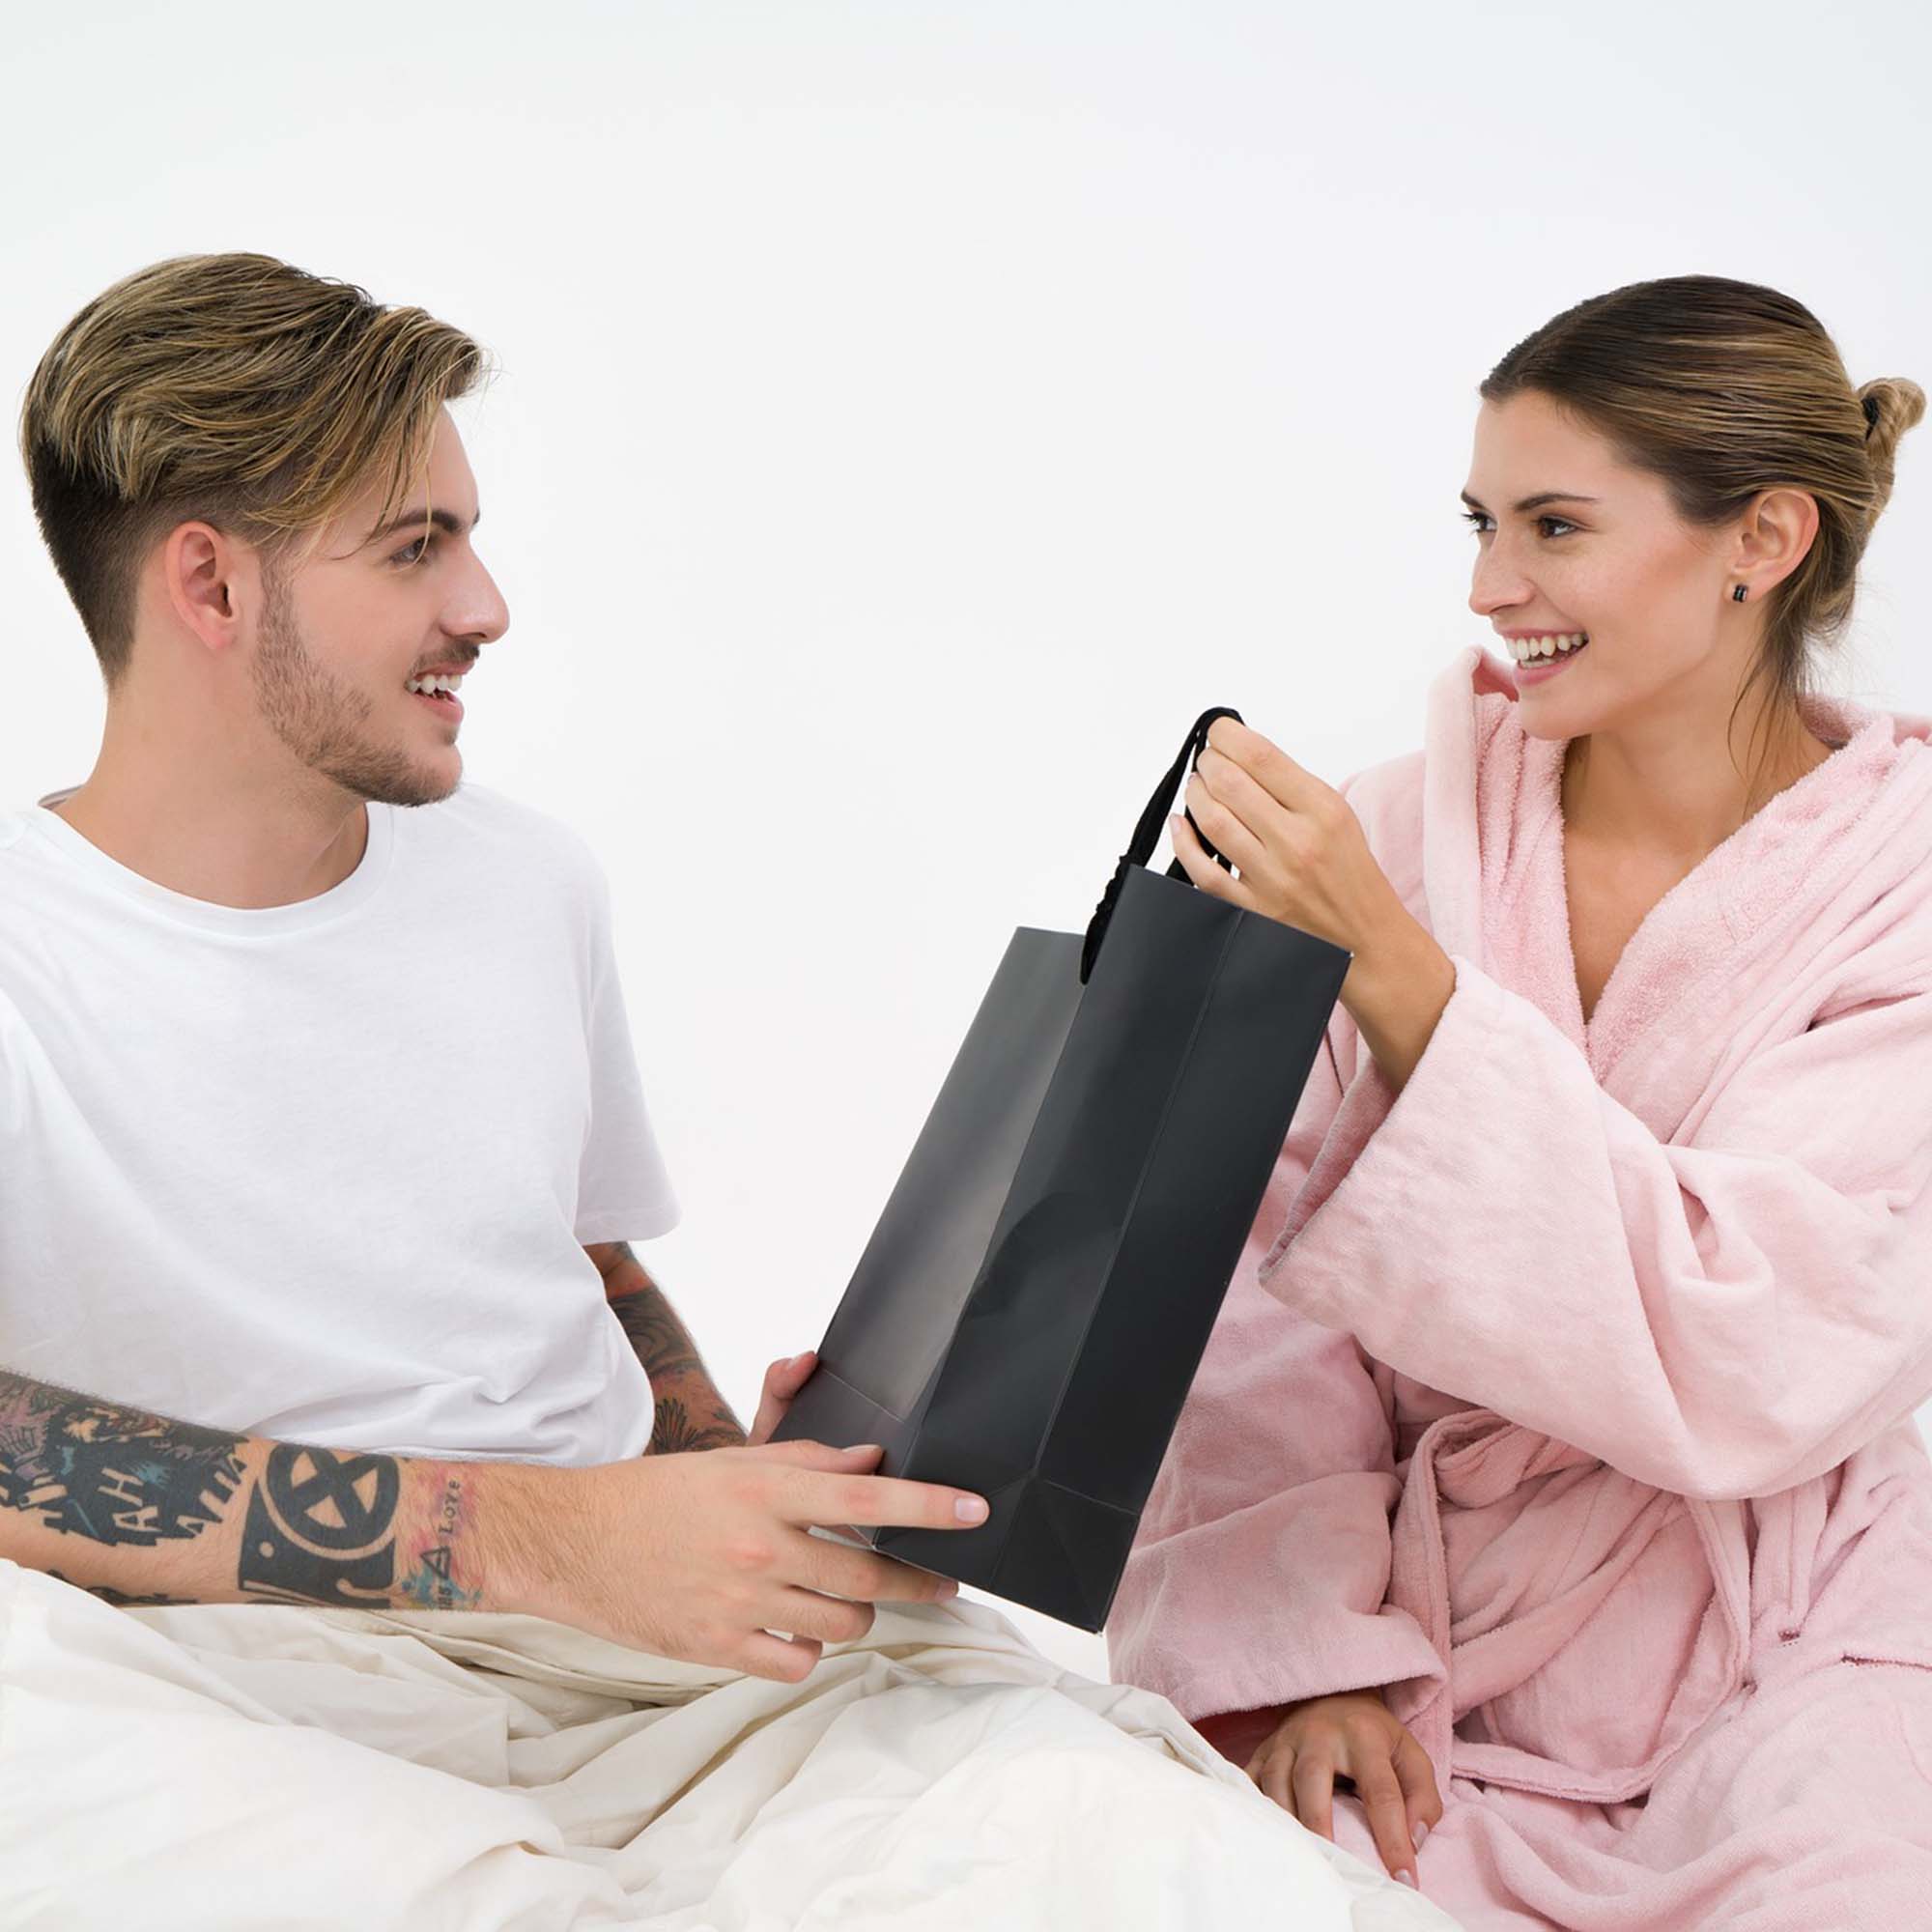 10 Best Gifts for Your Boyfriend